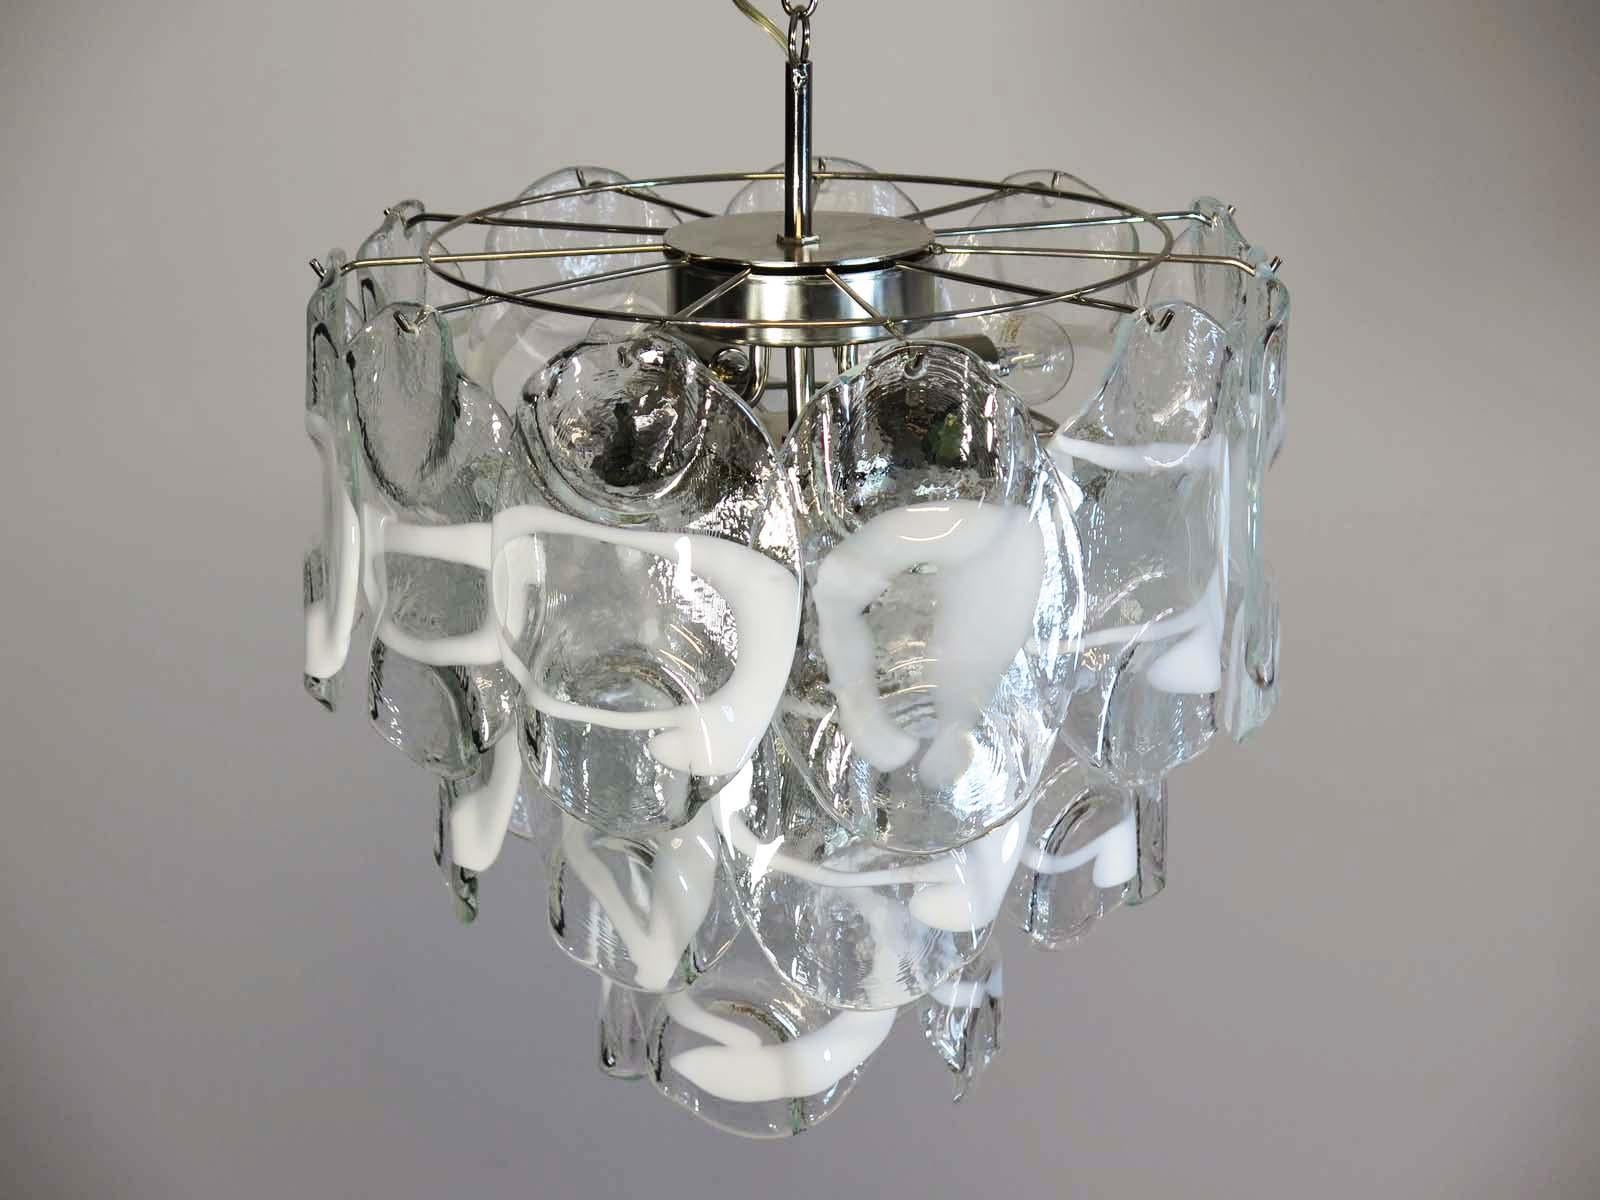 Vintage Italian Murano chandelier in Vistosi style. The chandelier has 23 fantastic Murano white and transparent glasses (